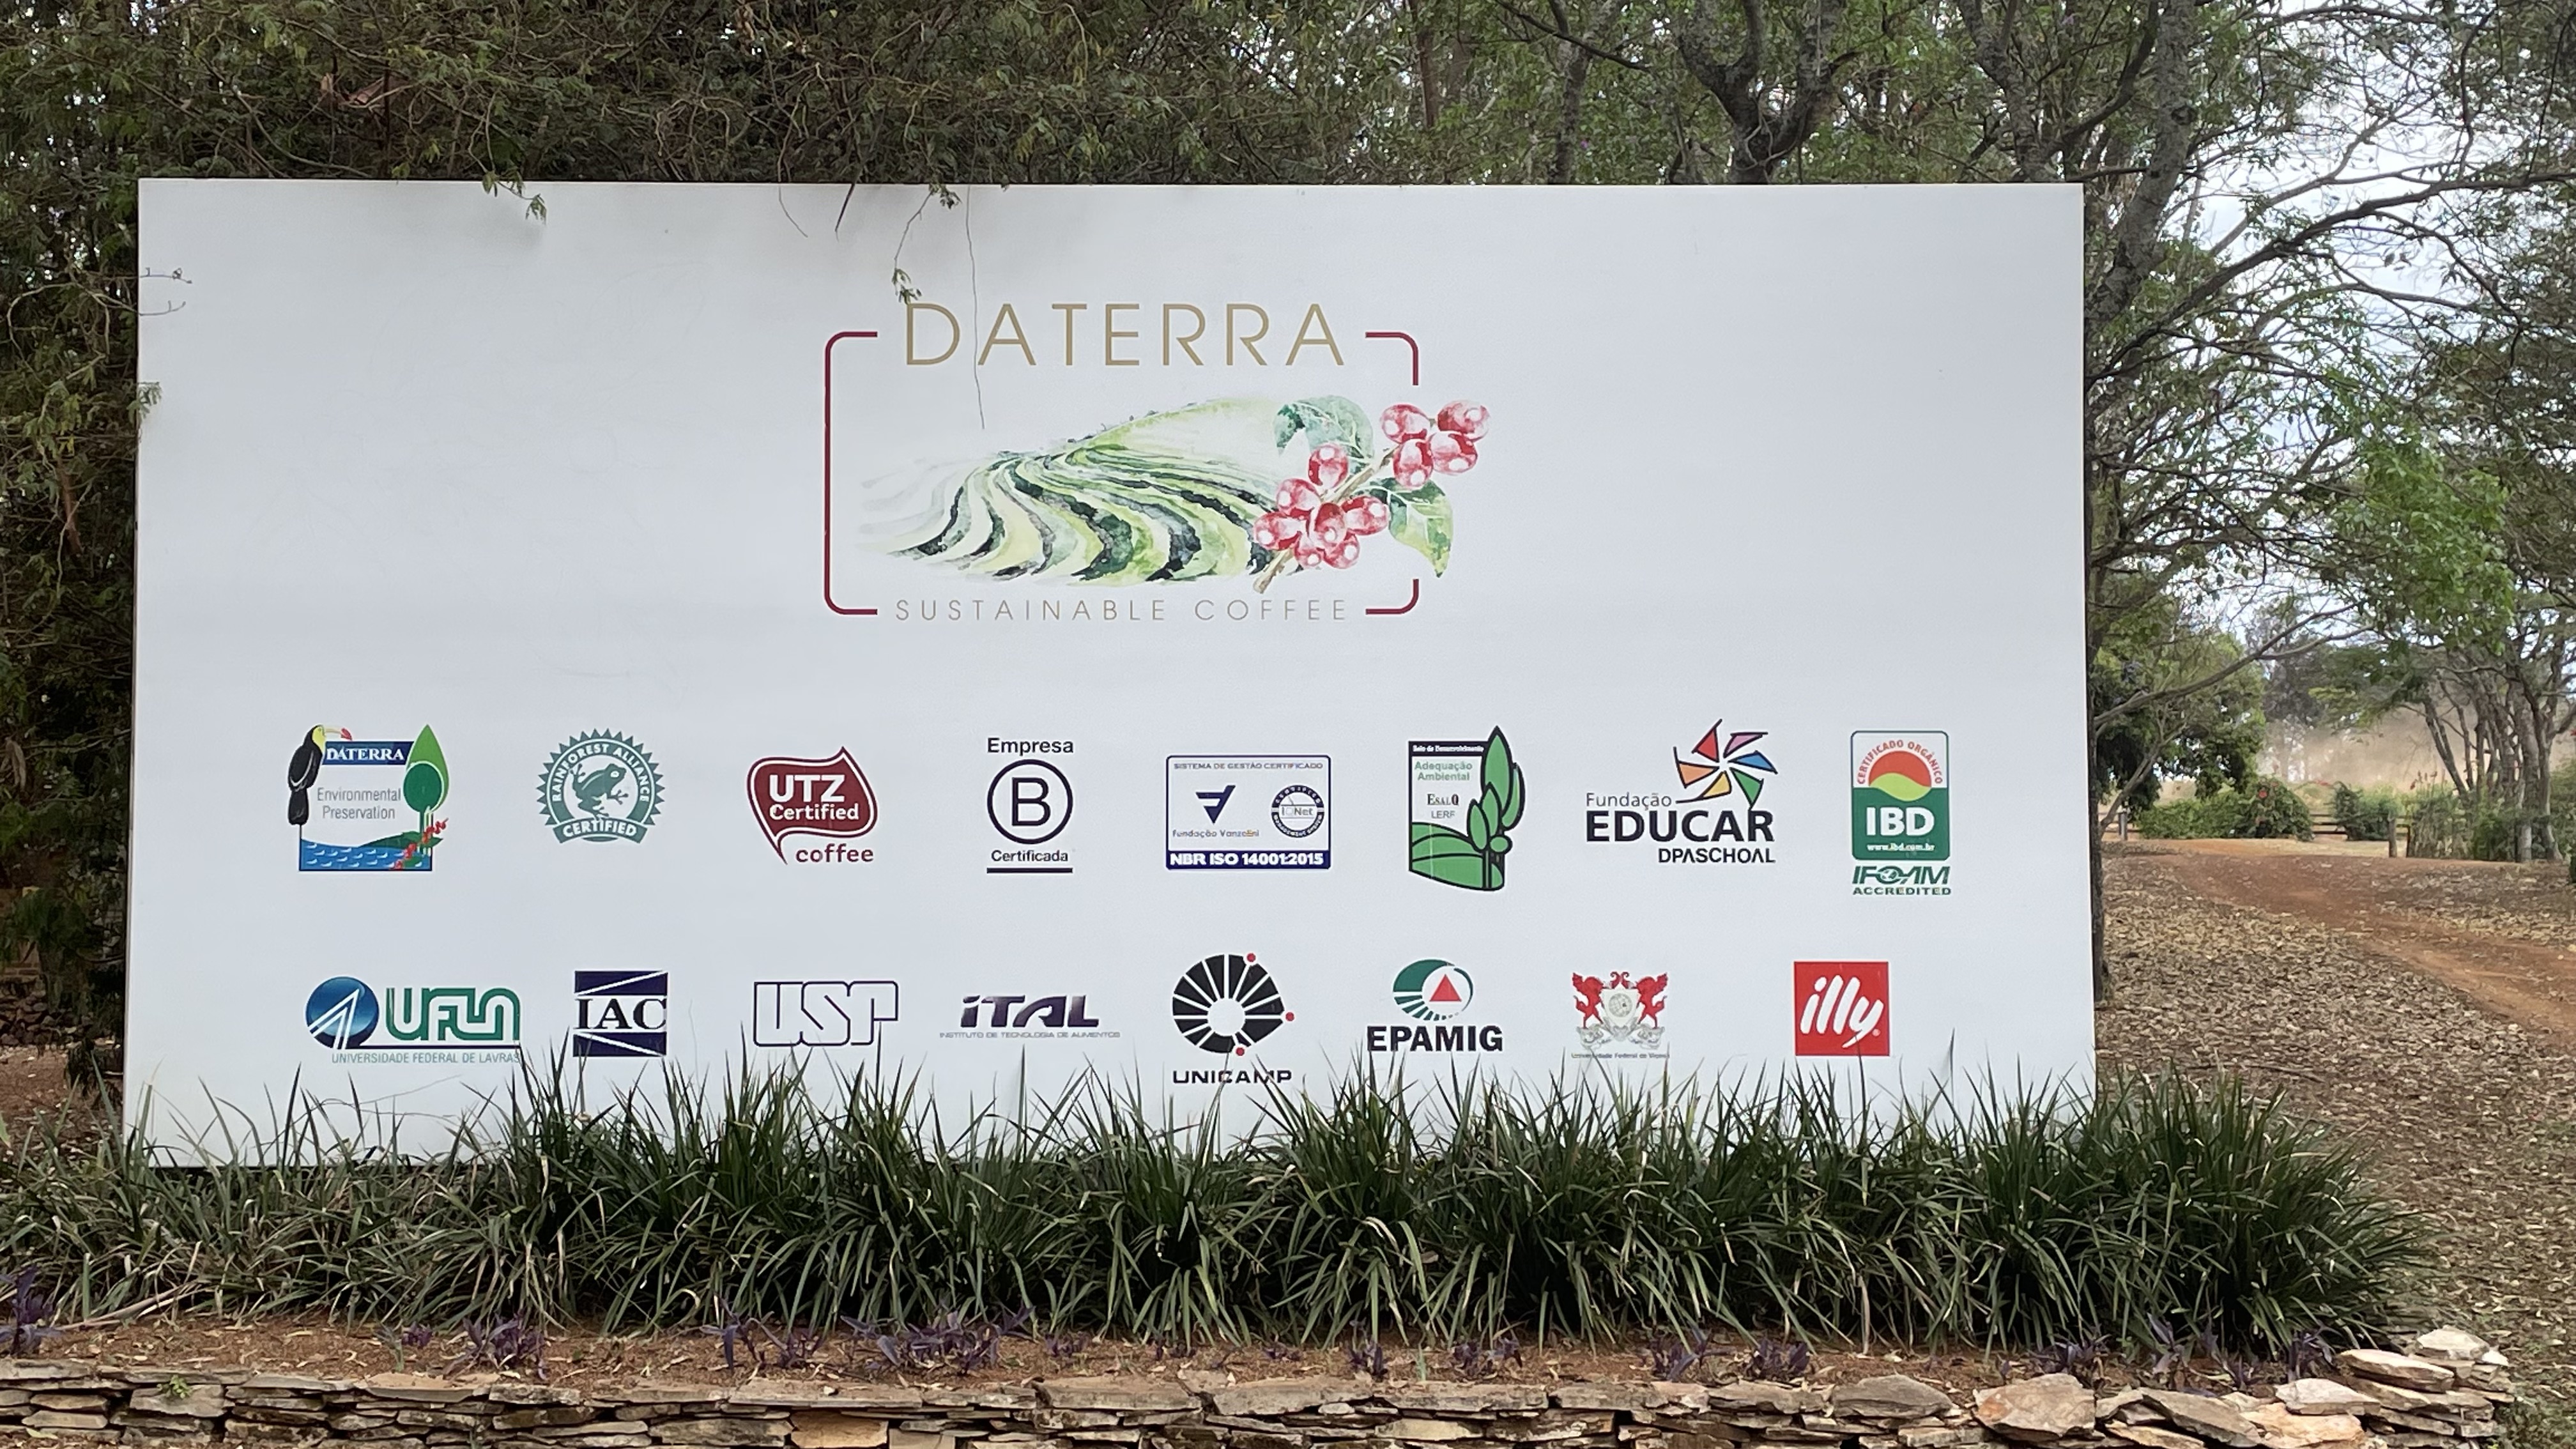 The entrance by Daterra